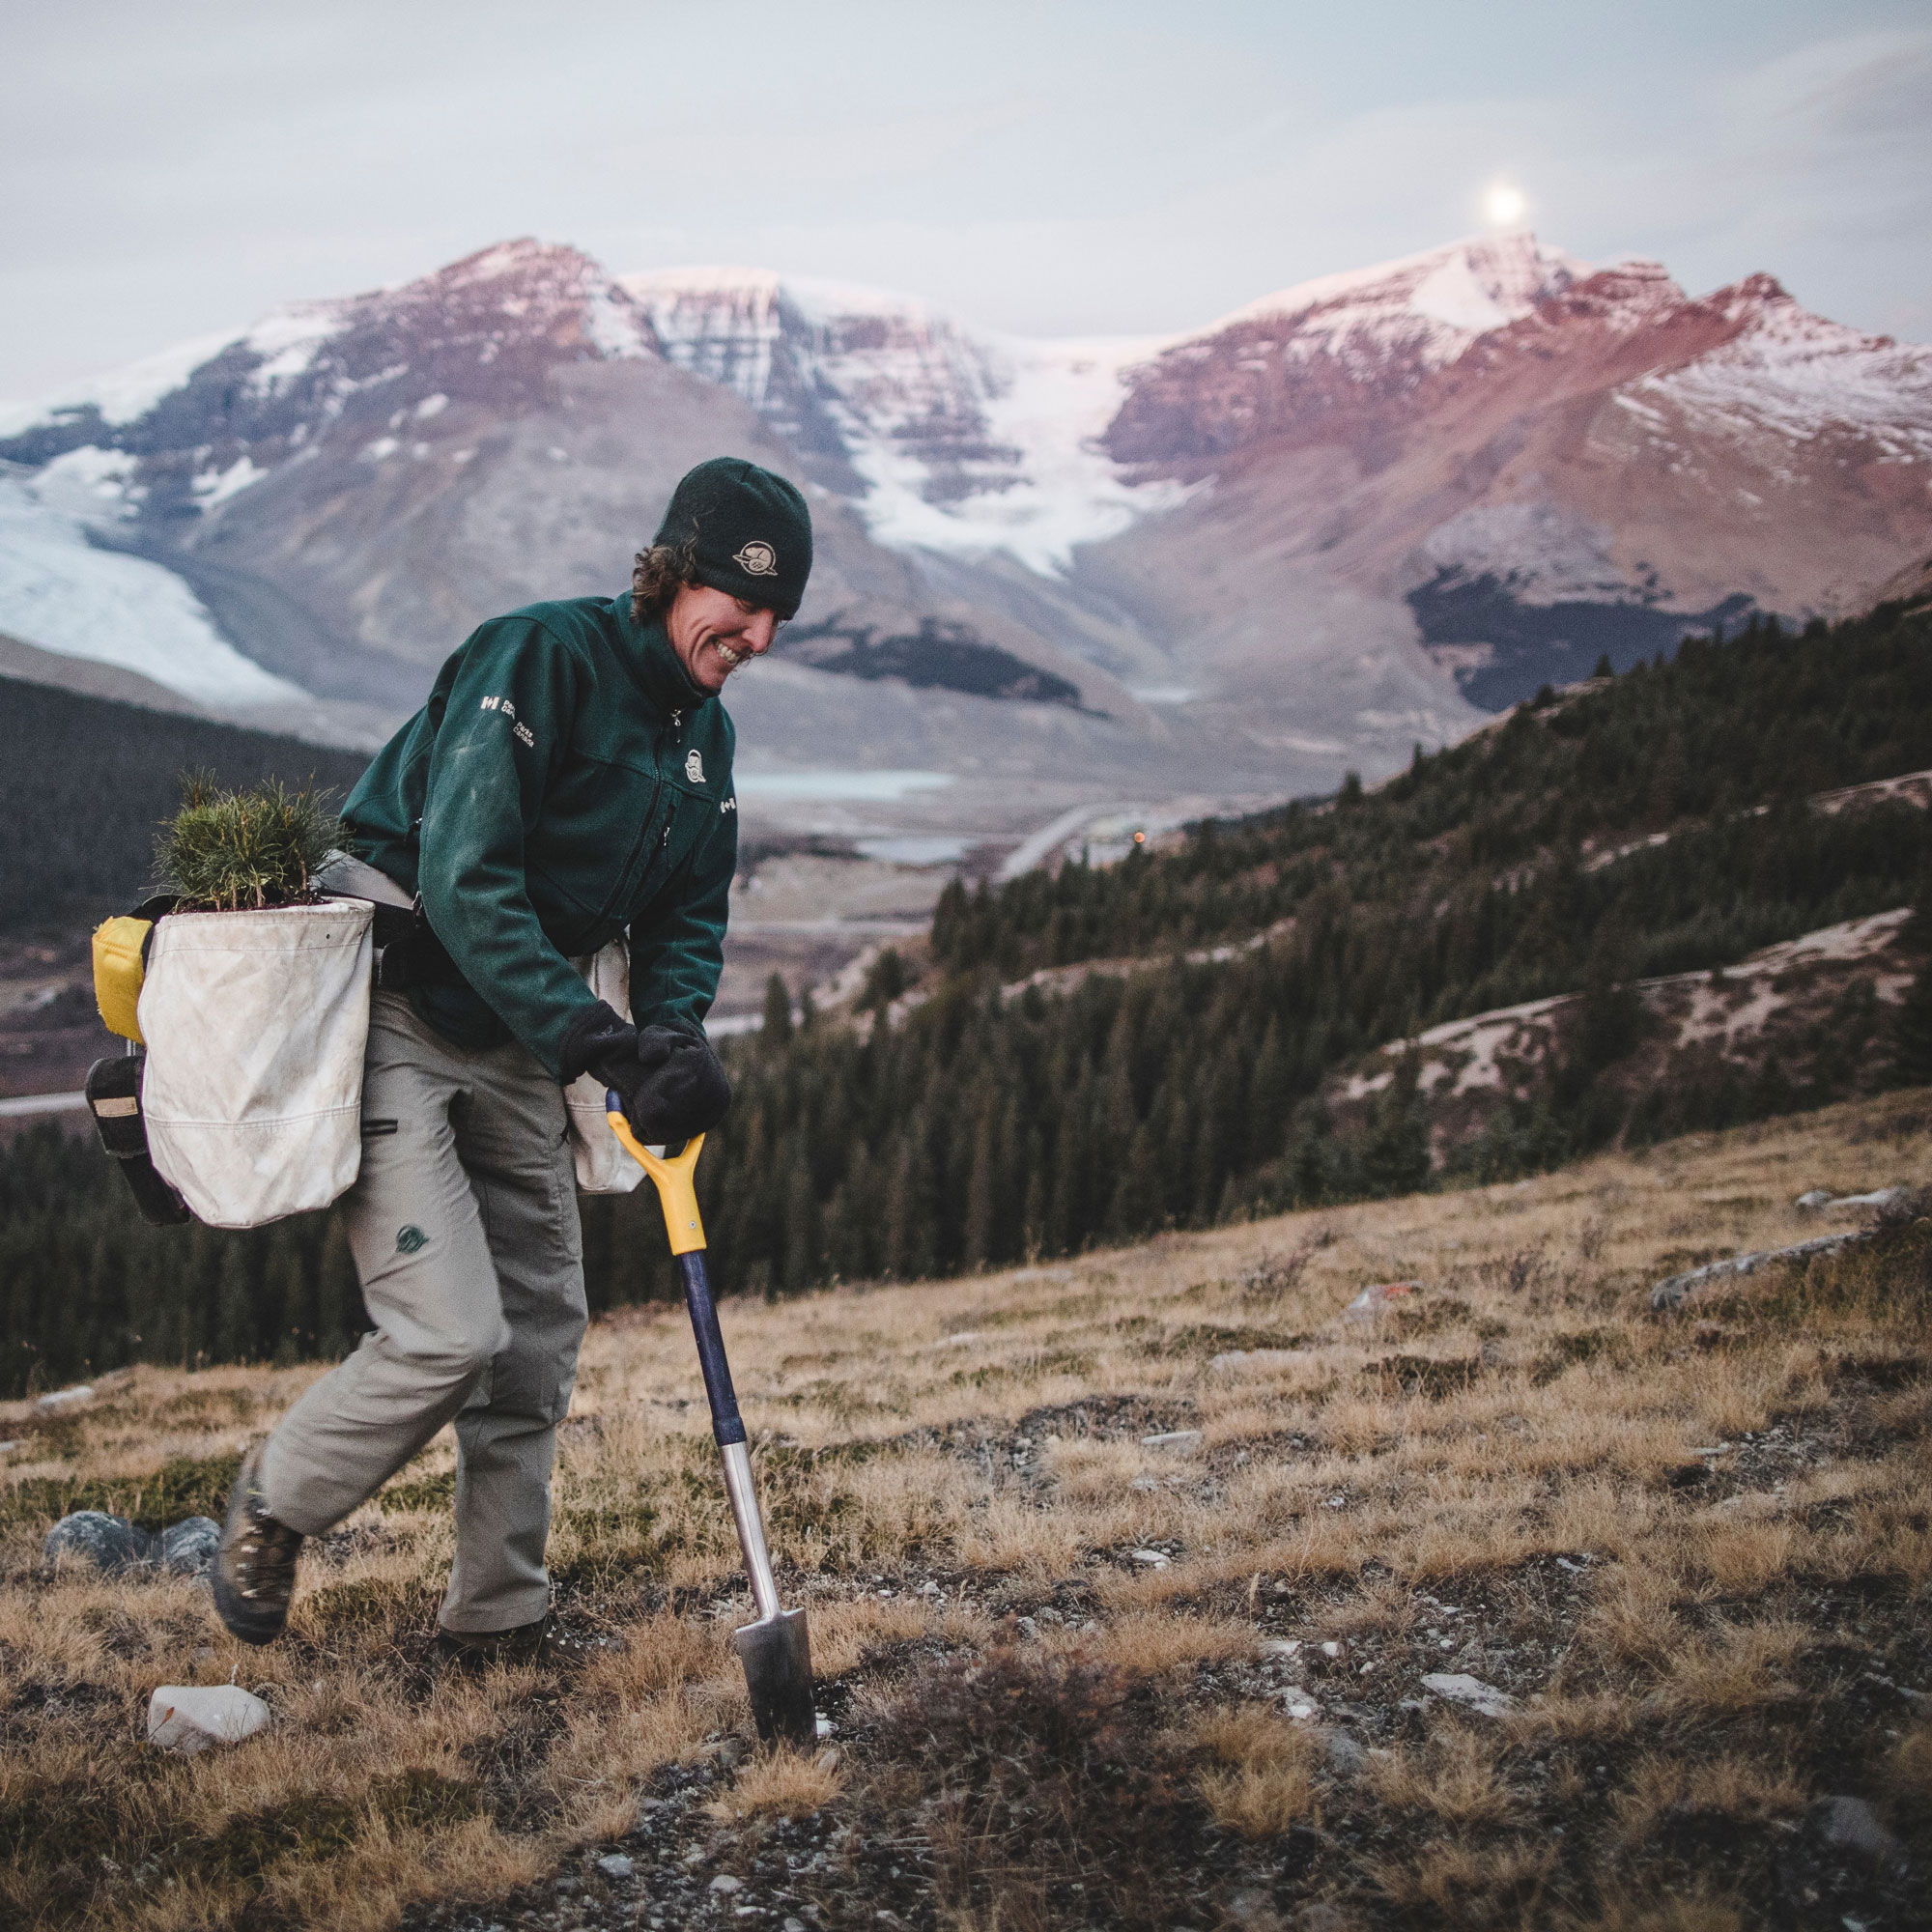 11 Of The Best Nature Jobs For Outdoor Enthusiasts - THE ENVIRONMENTOR